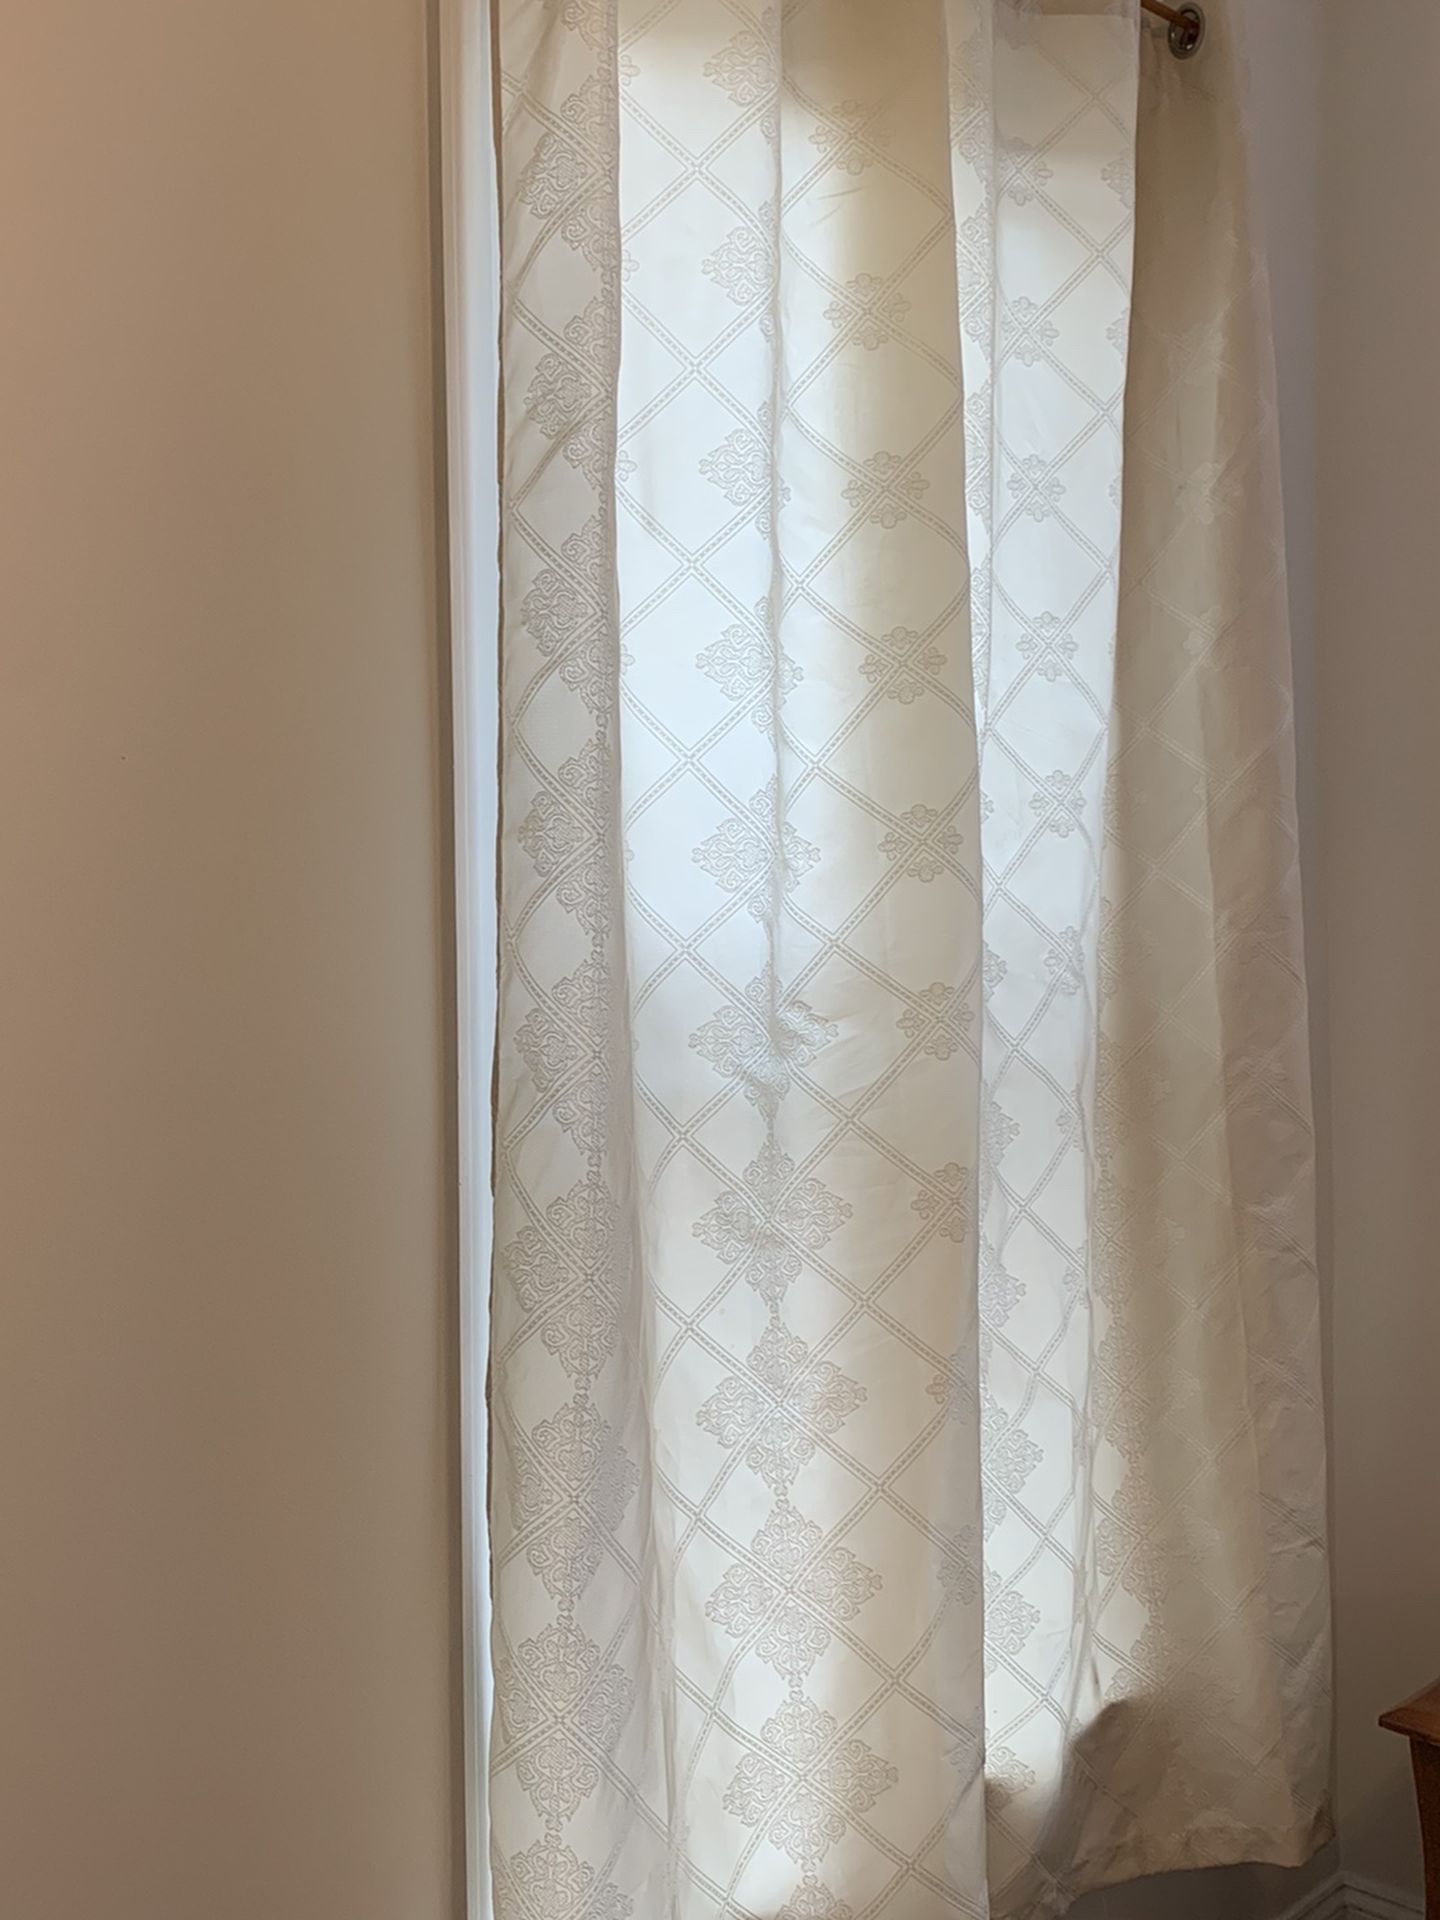 2 Curtain Panels Off White Or Beige 84”